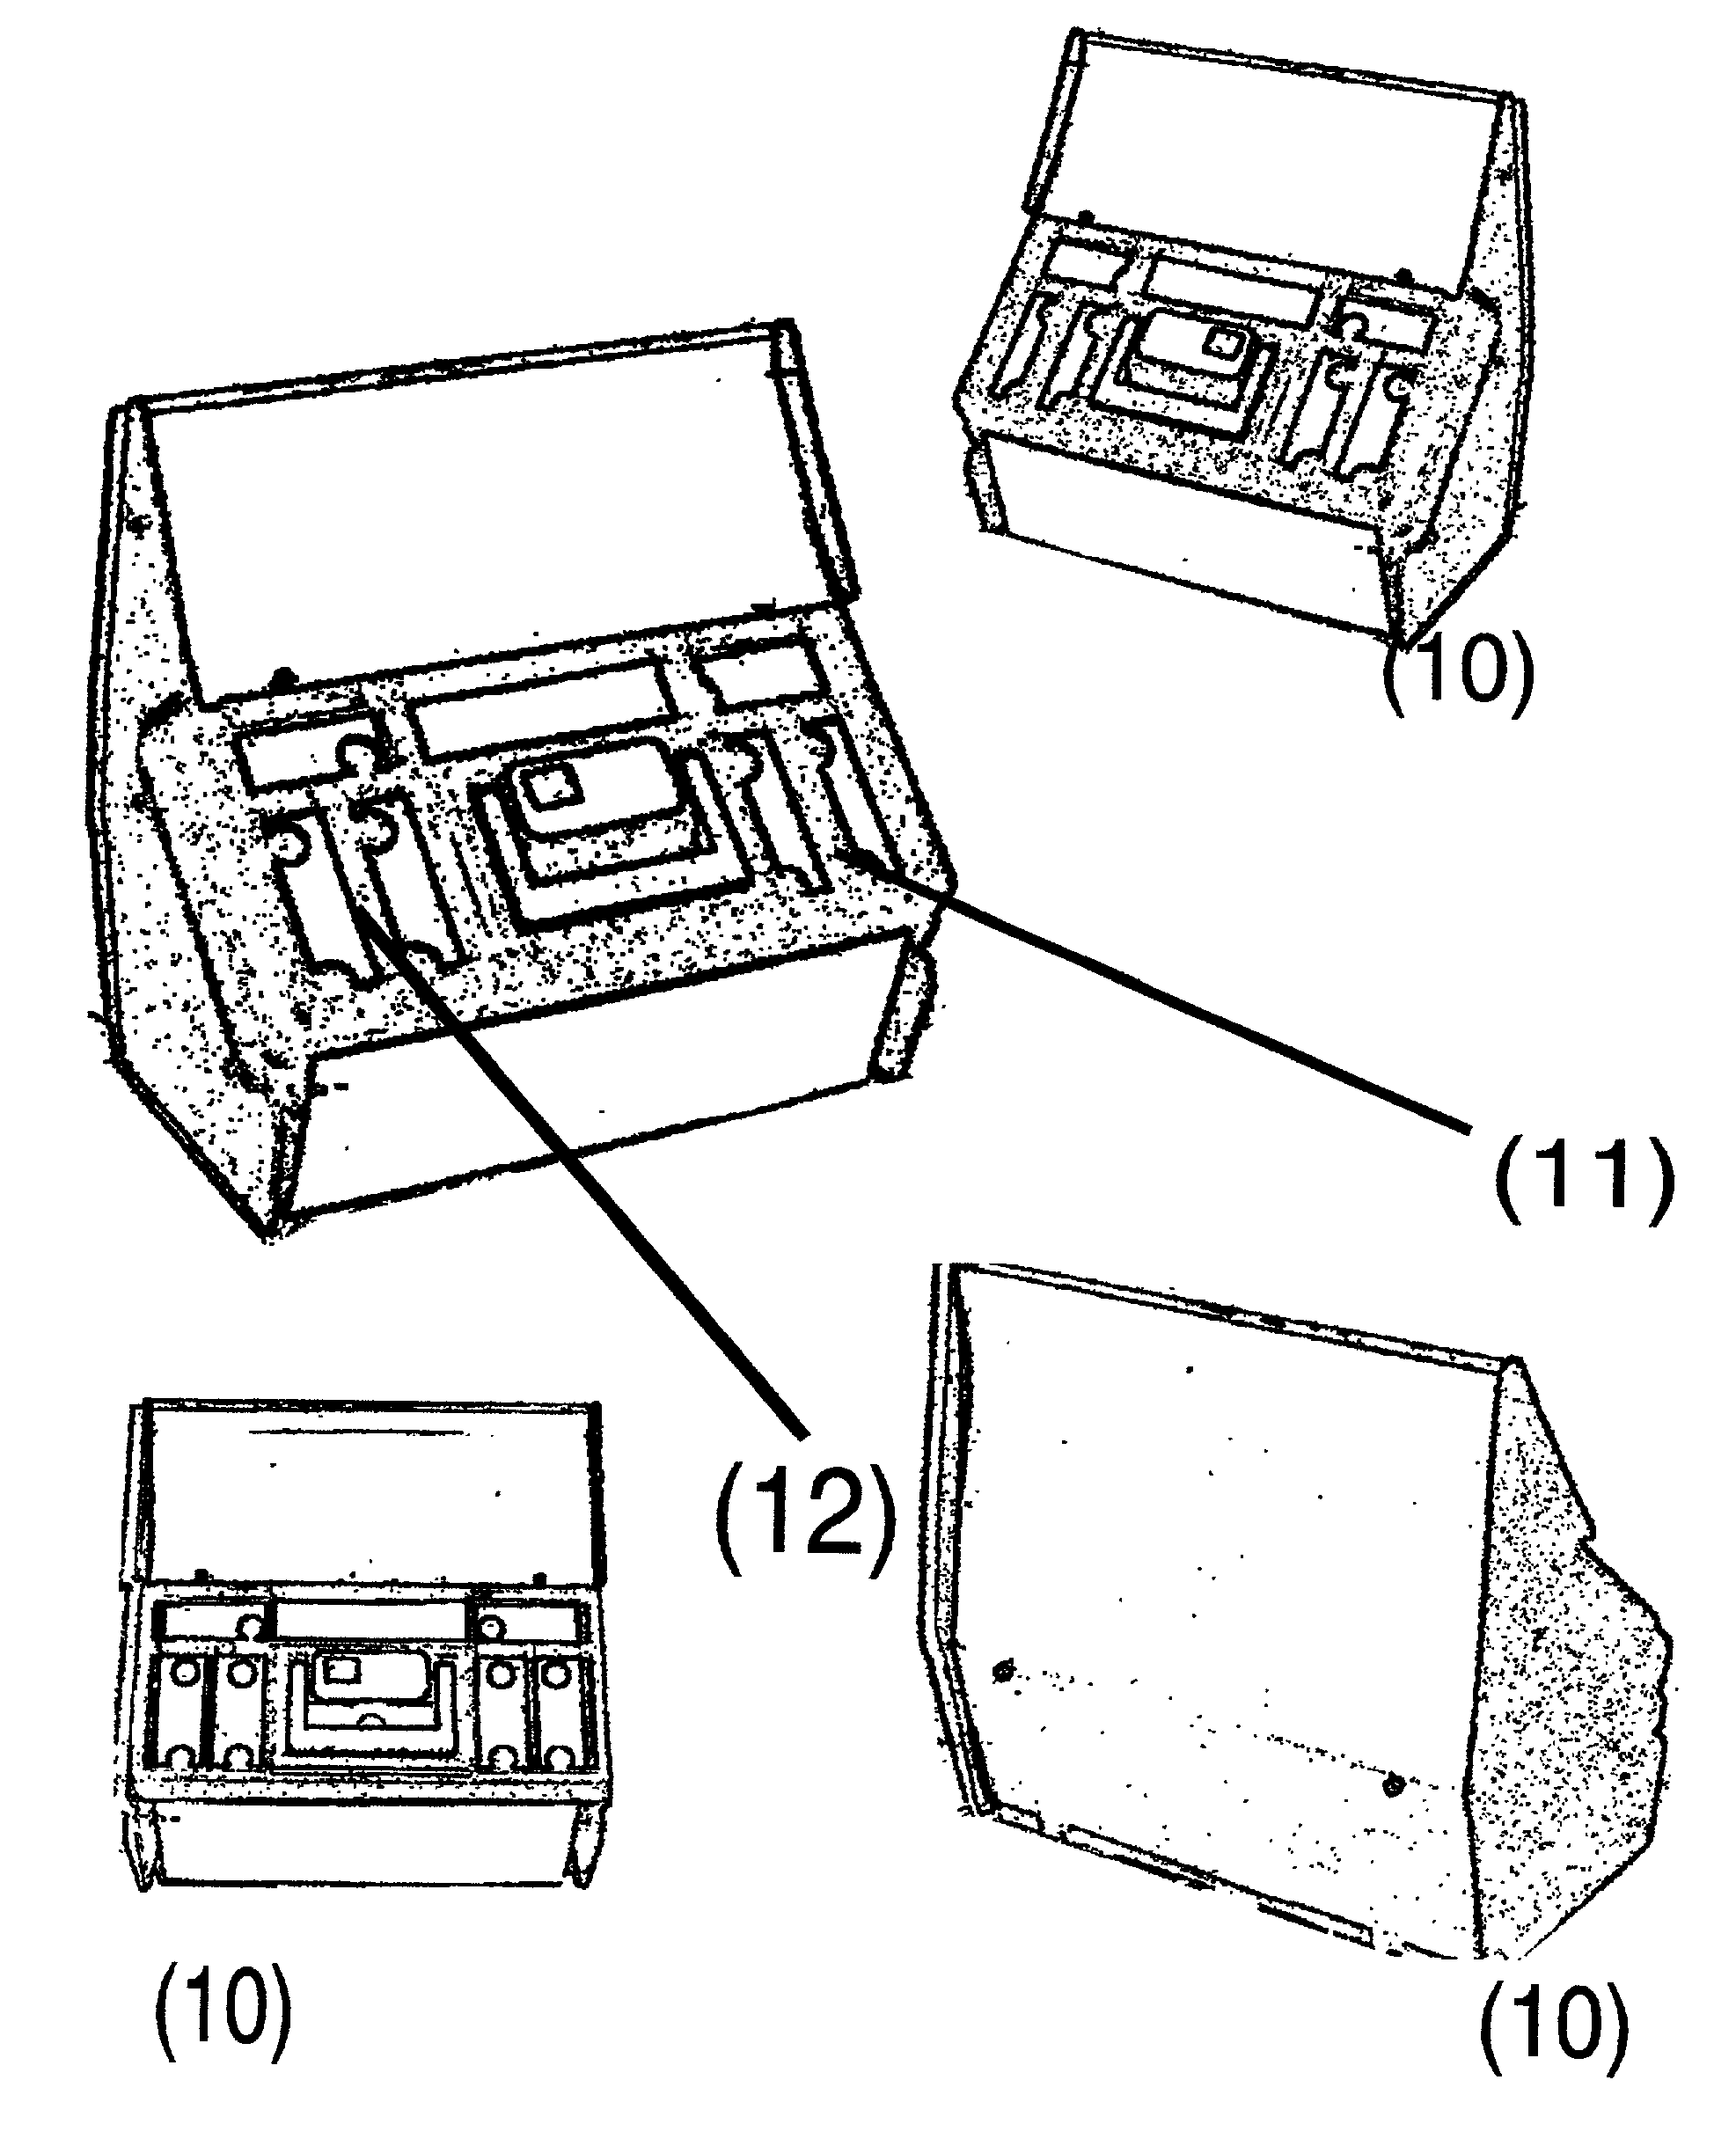 Method of distributing widespread portable emergency cellular power and e-911 assistance